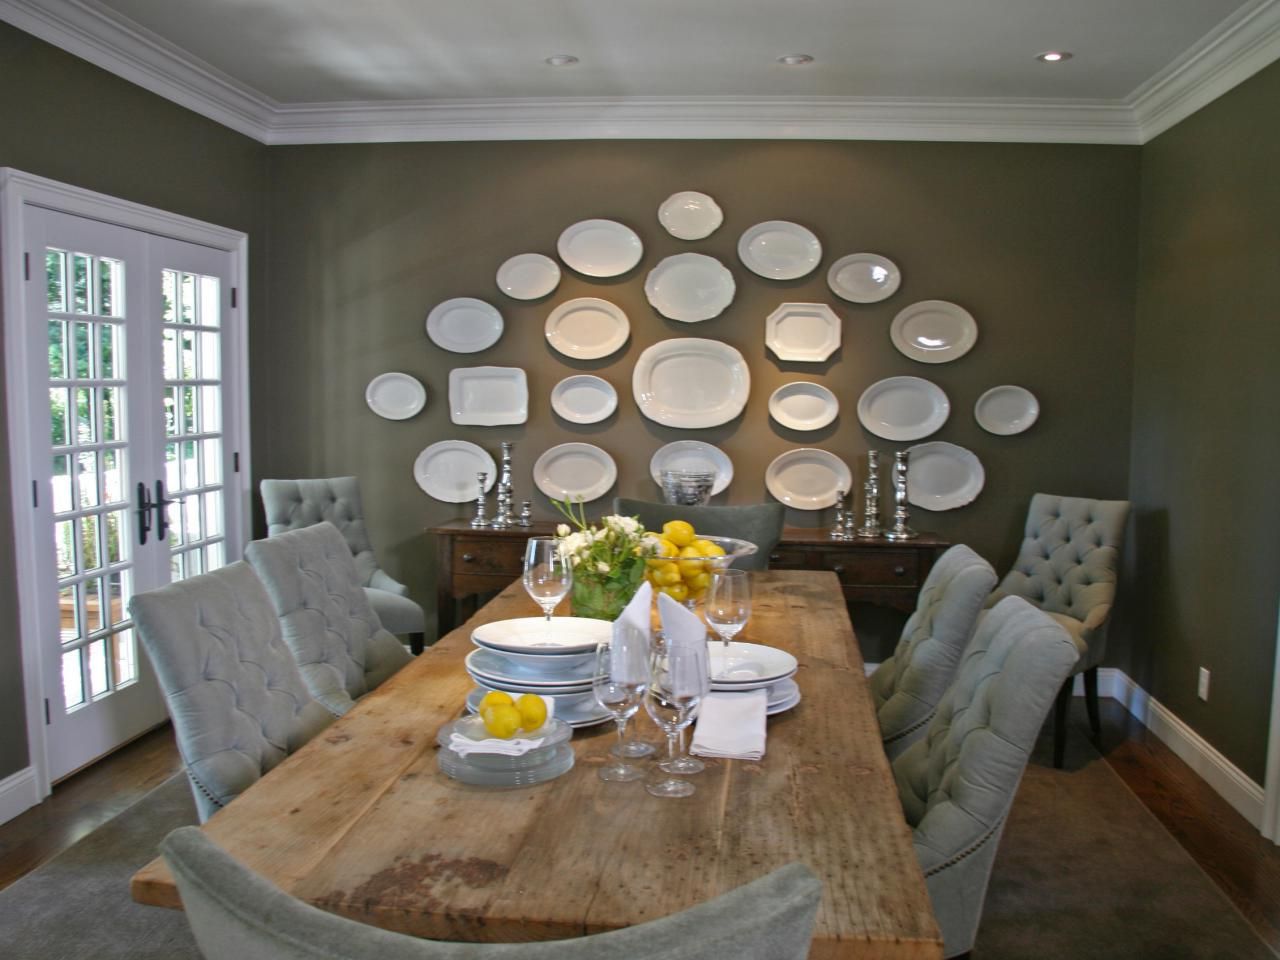 mesmerizing-long-dining-room-with-exquisite-white-decorative-plates-on-mud-green-colored-wall